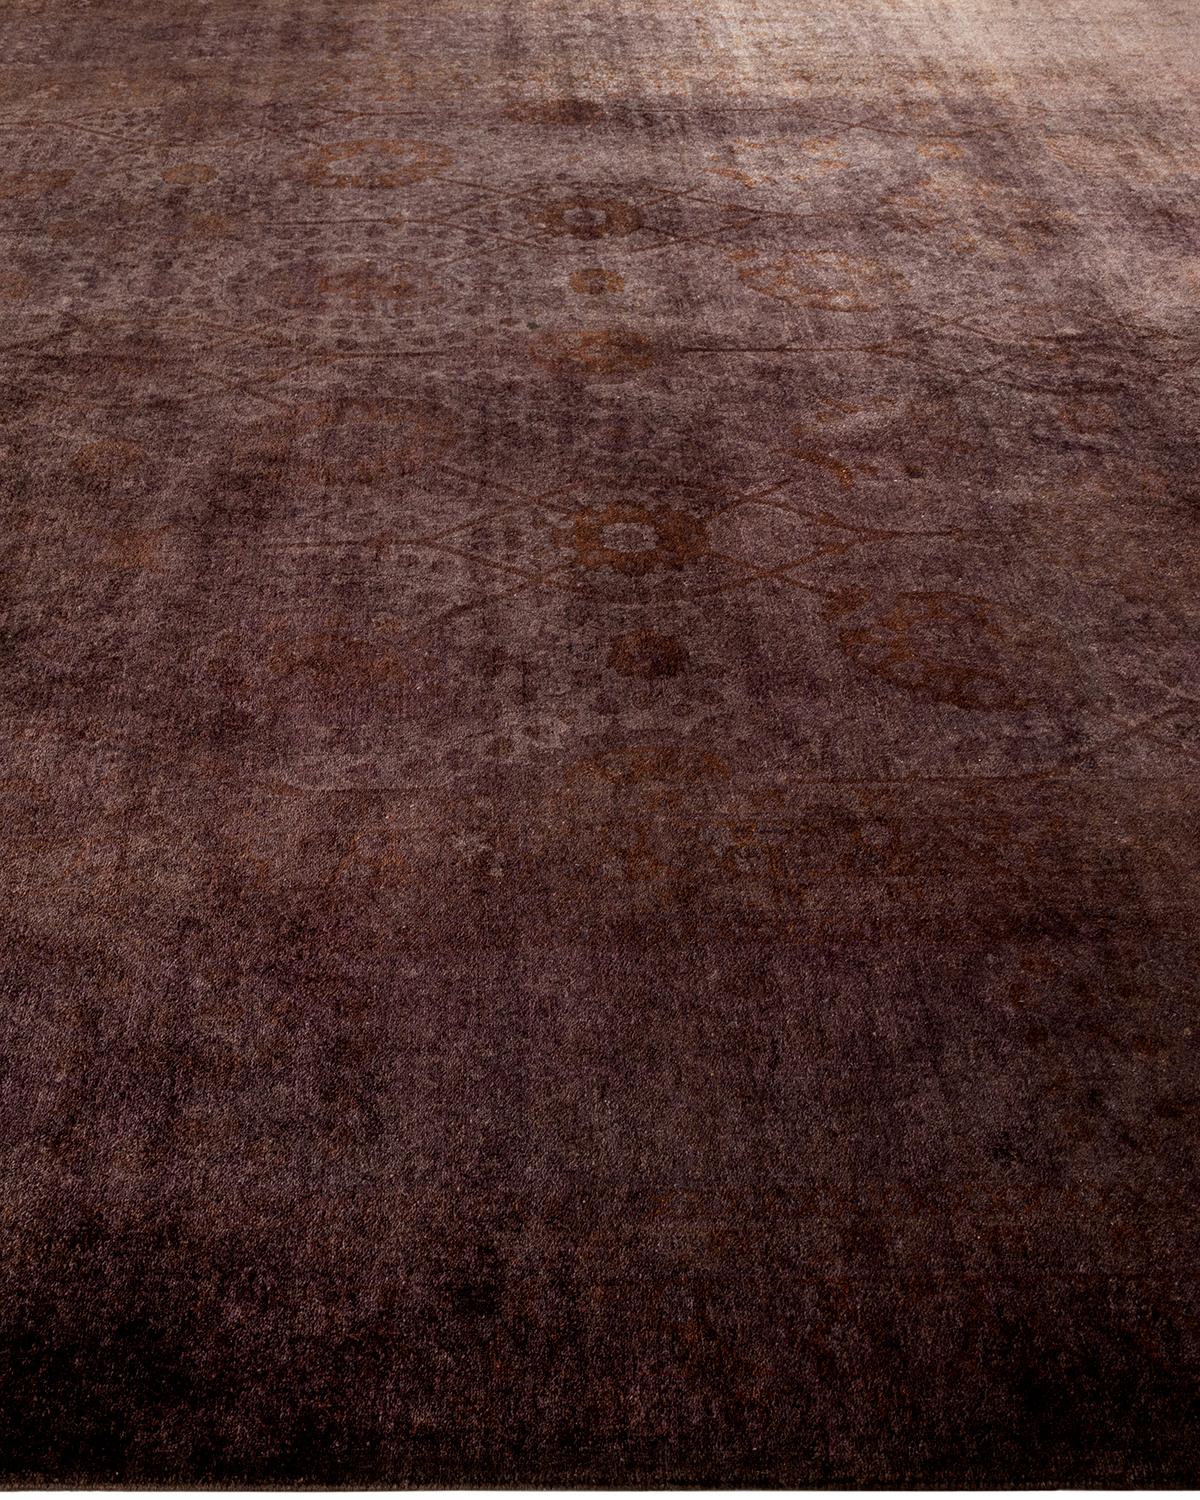 Contemporary Overdyed Hand Knotted Wool Brown Area Rug  In New Condition For Sale In Norwalk, CT